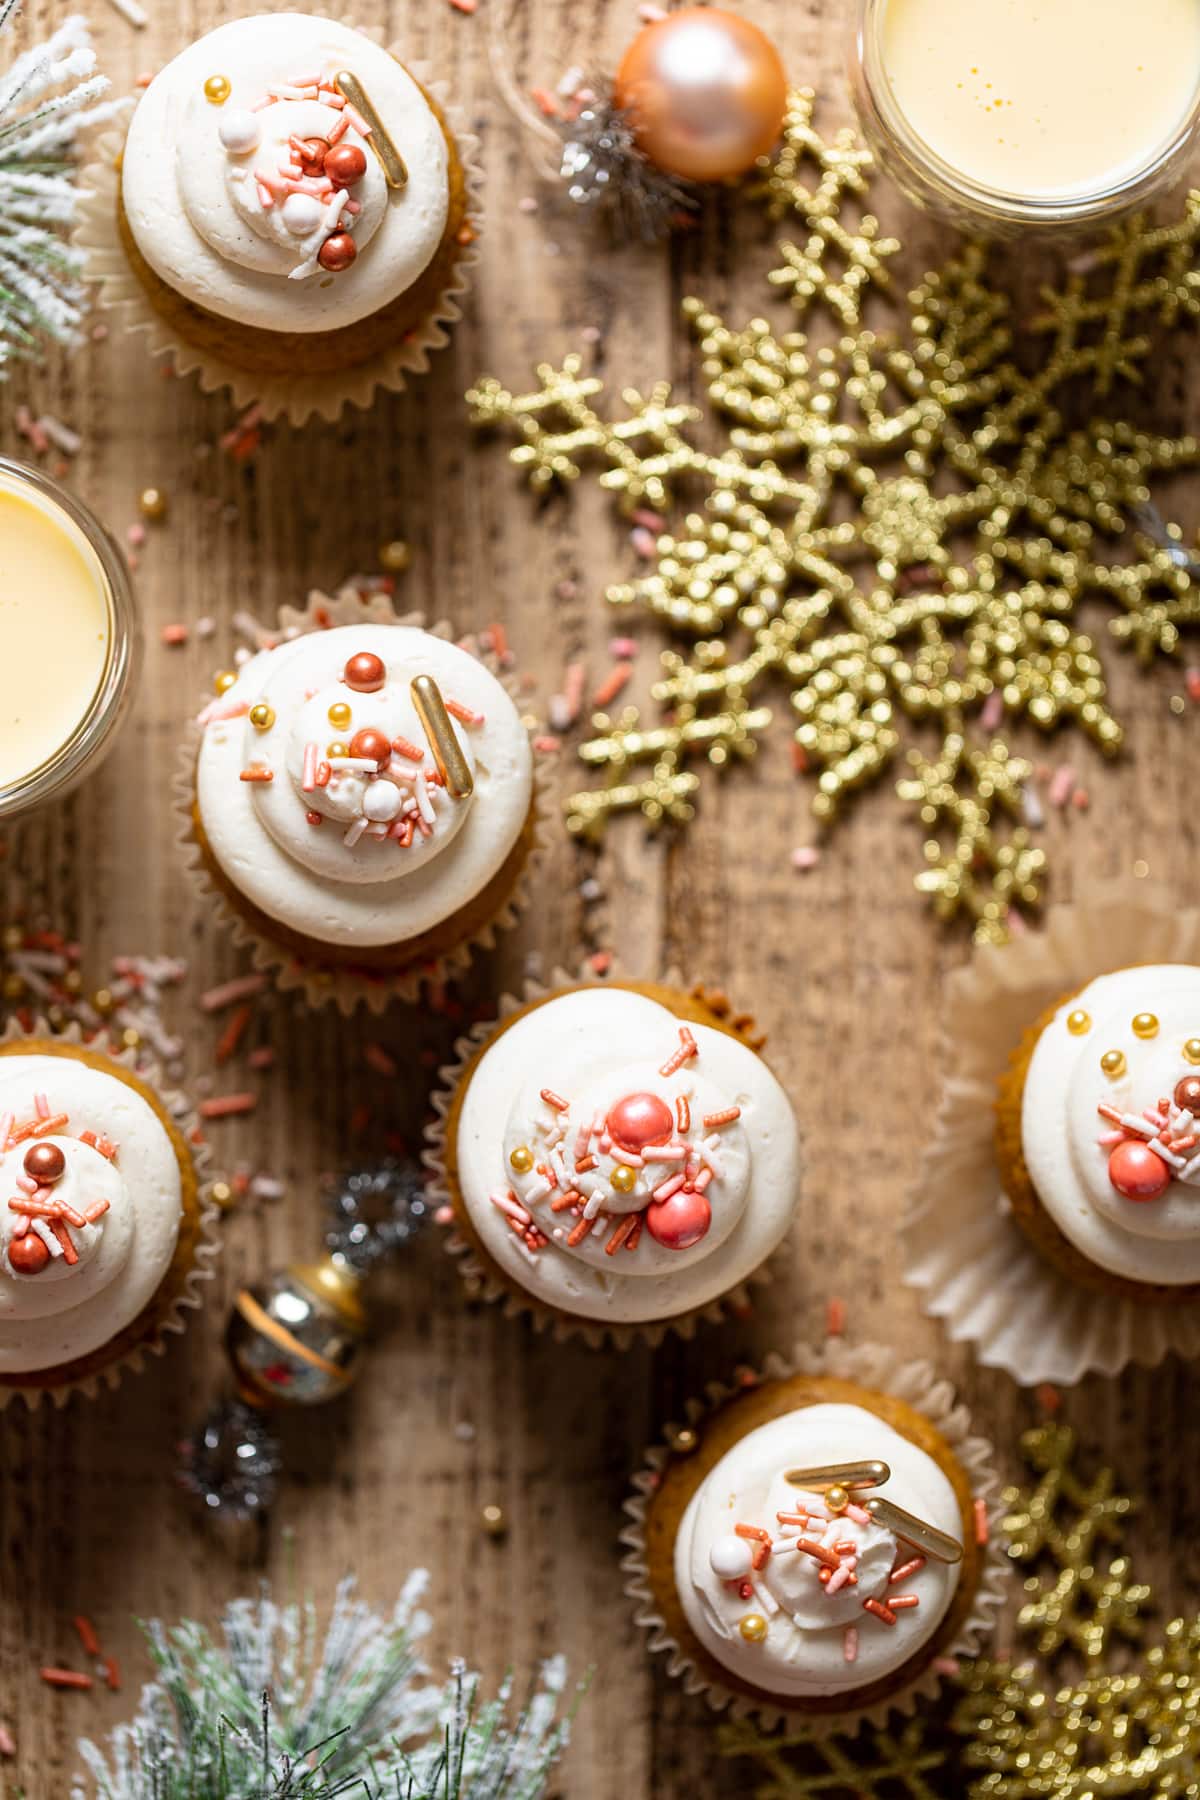 Gingerbread Cupcakes with Eggnog Frosting on a table with Christmas decorations including gold-colored snowflakes